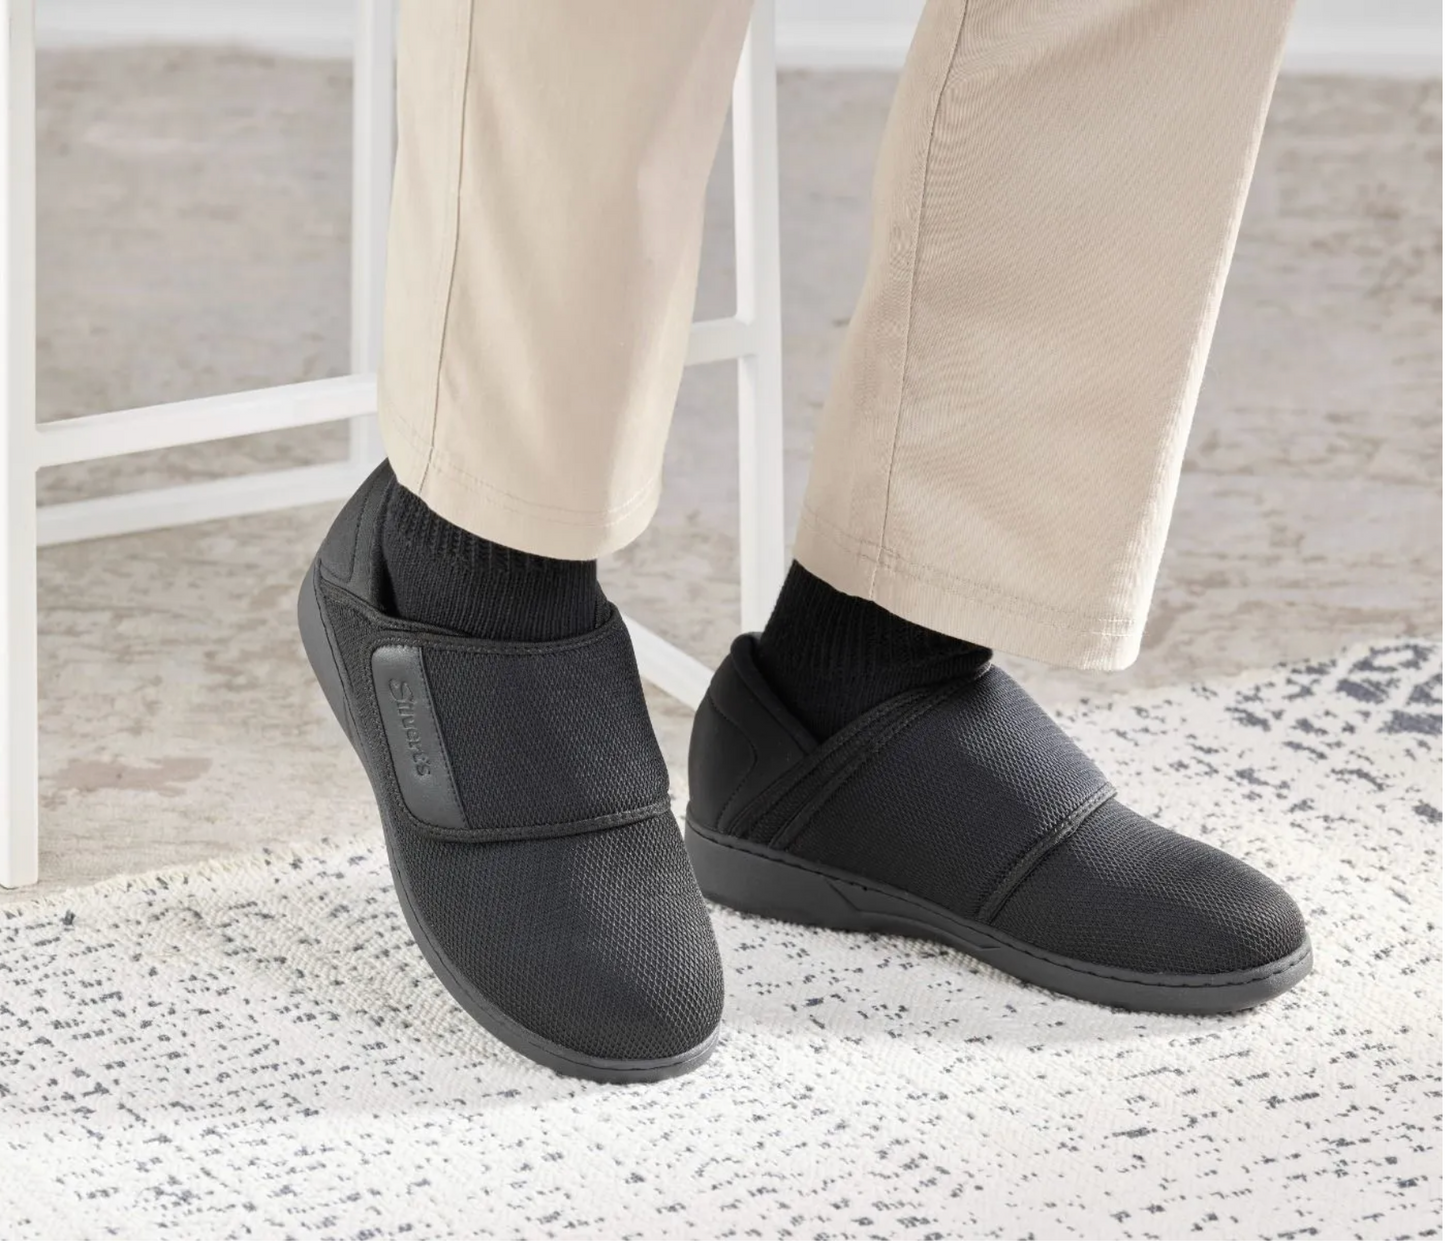 Men's Easy to Put on Shoes for Seniors | Art in Aging